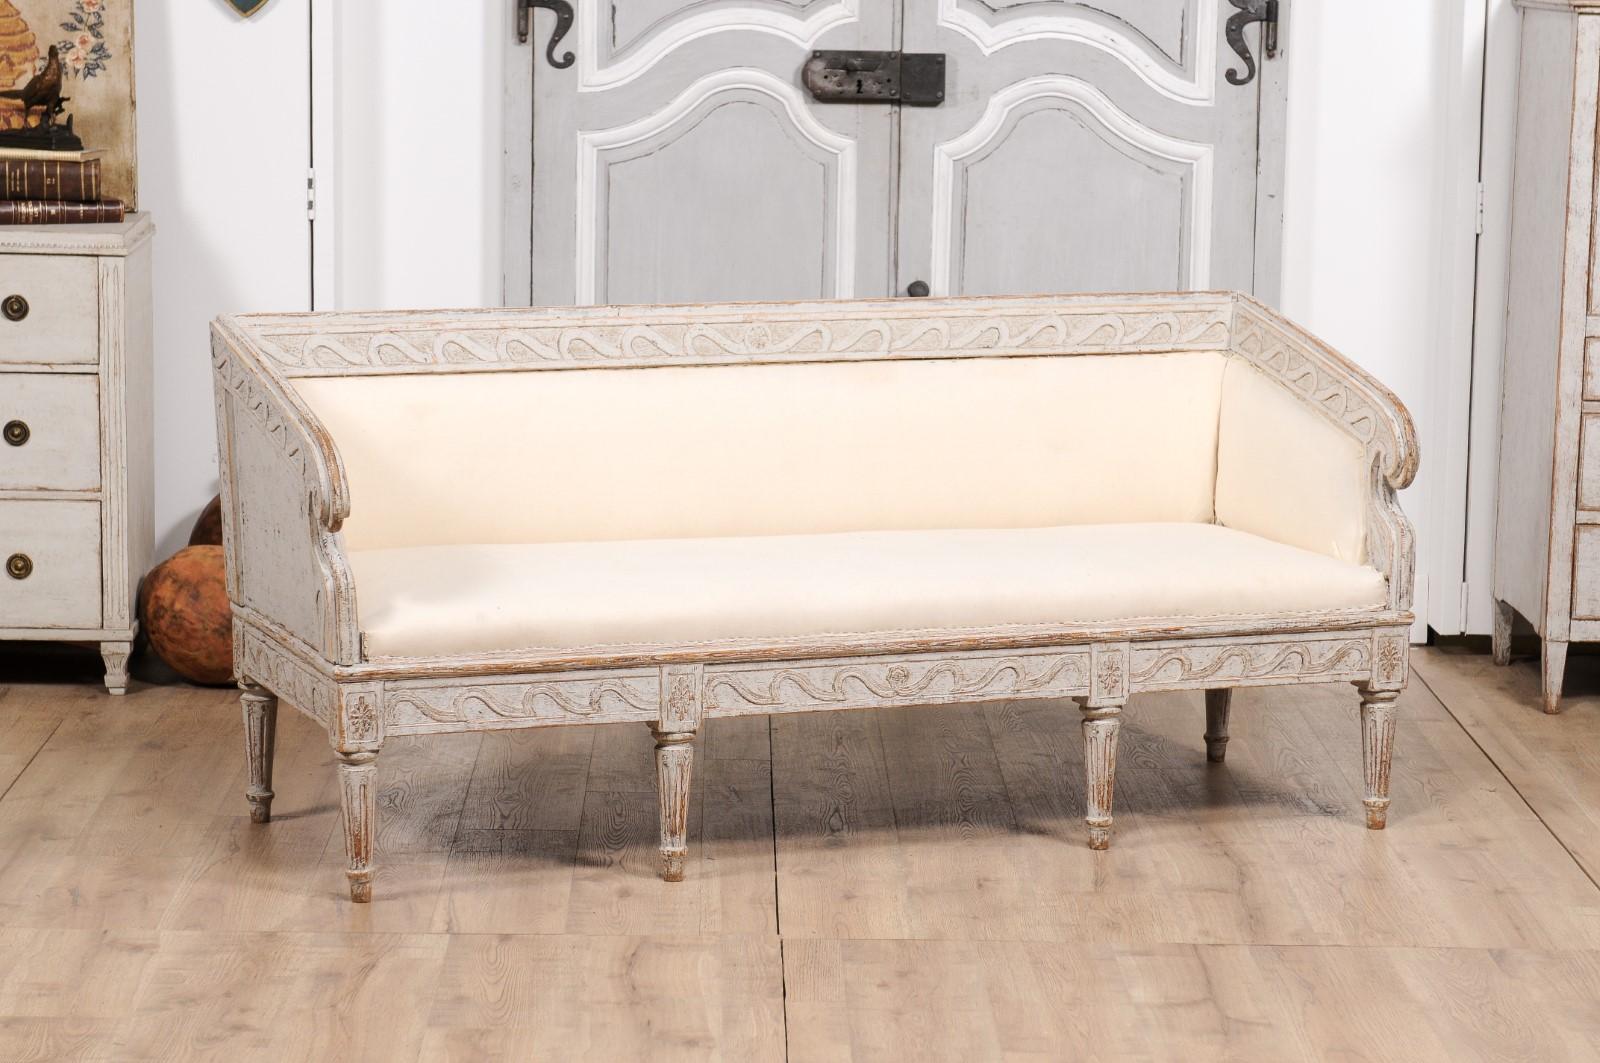 Painted 1780s Gustavian Period Swedish Sofa with Carved Vitruvian Scroll Inspired Frieze